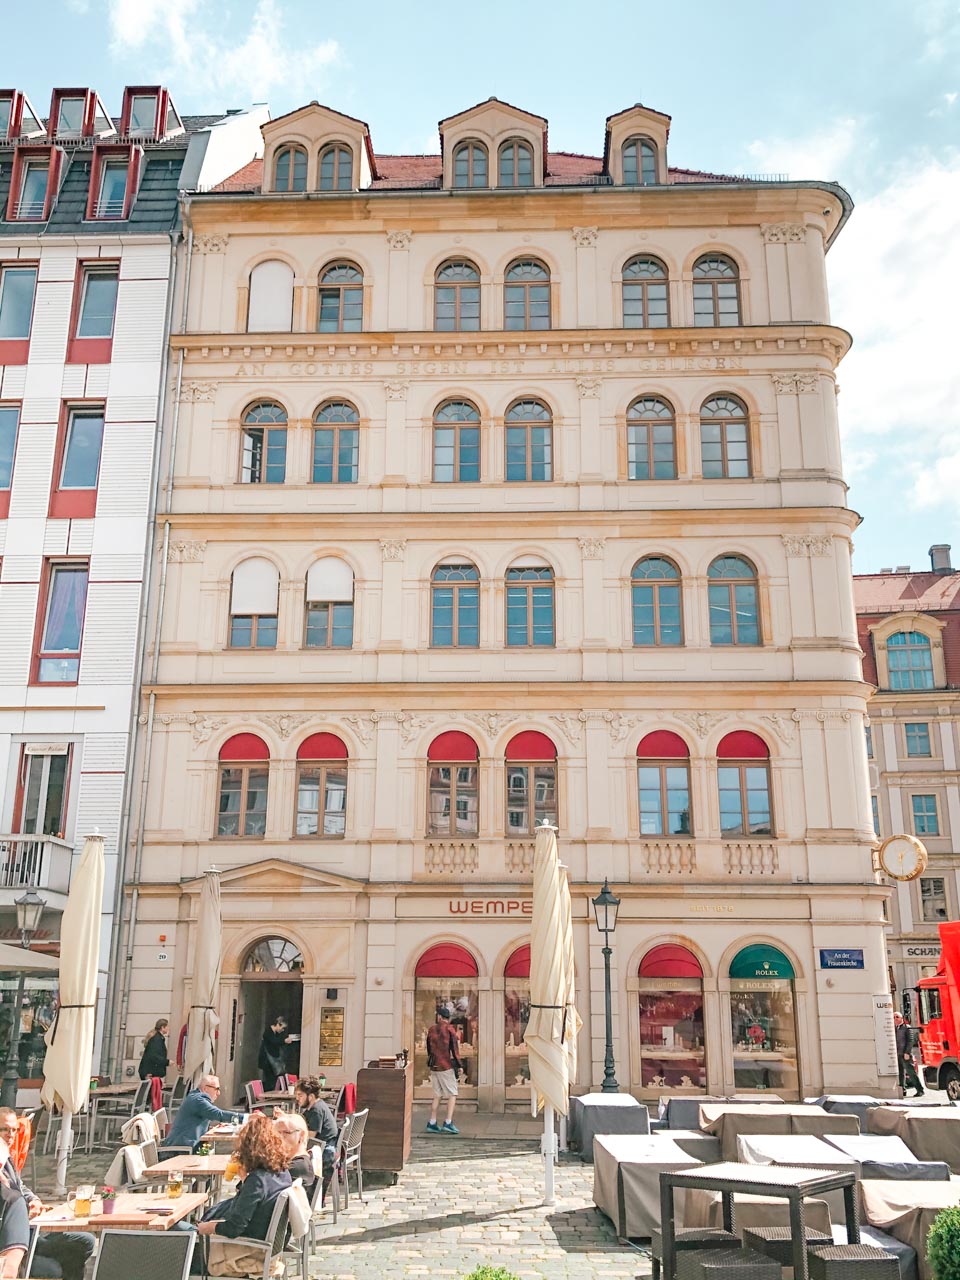 Wempe's jewellery and watch showroom on An der Frauenkirche in Dresden, Germany